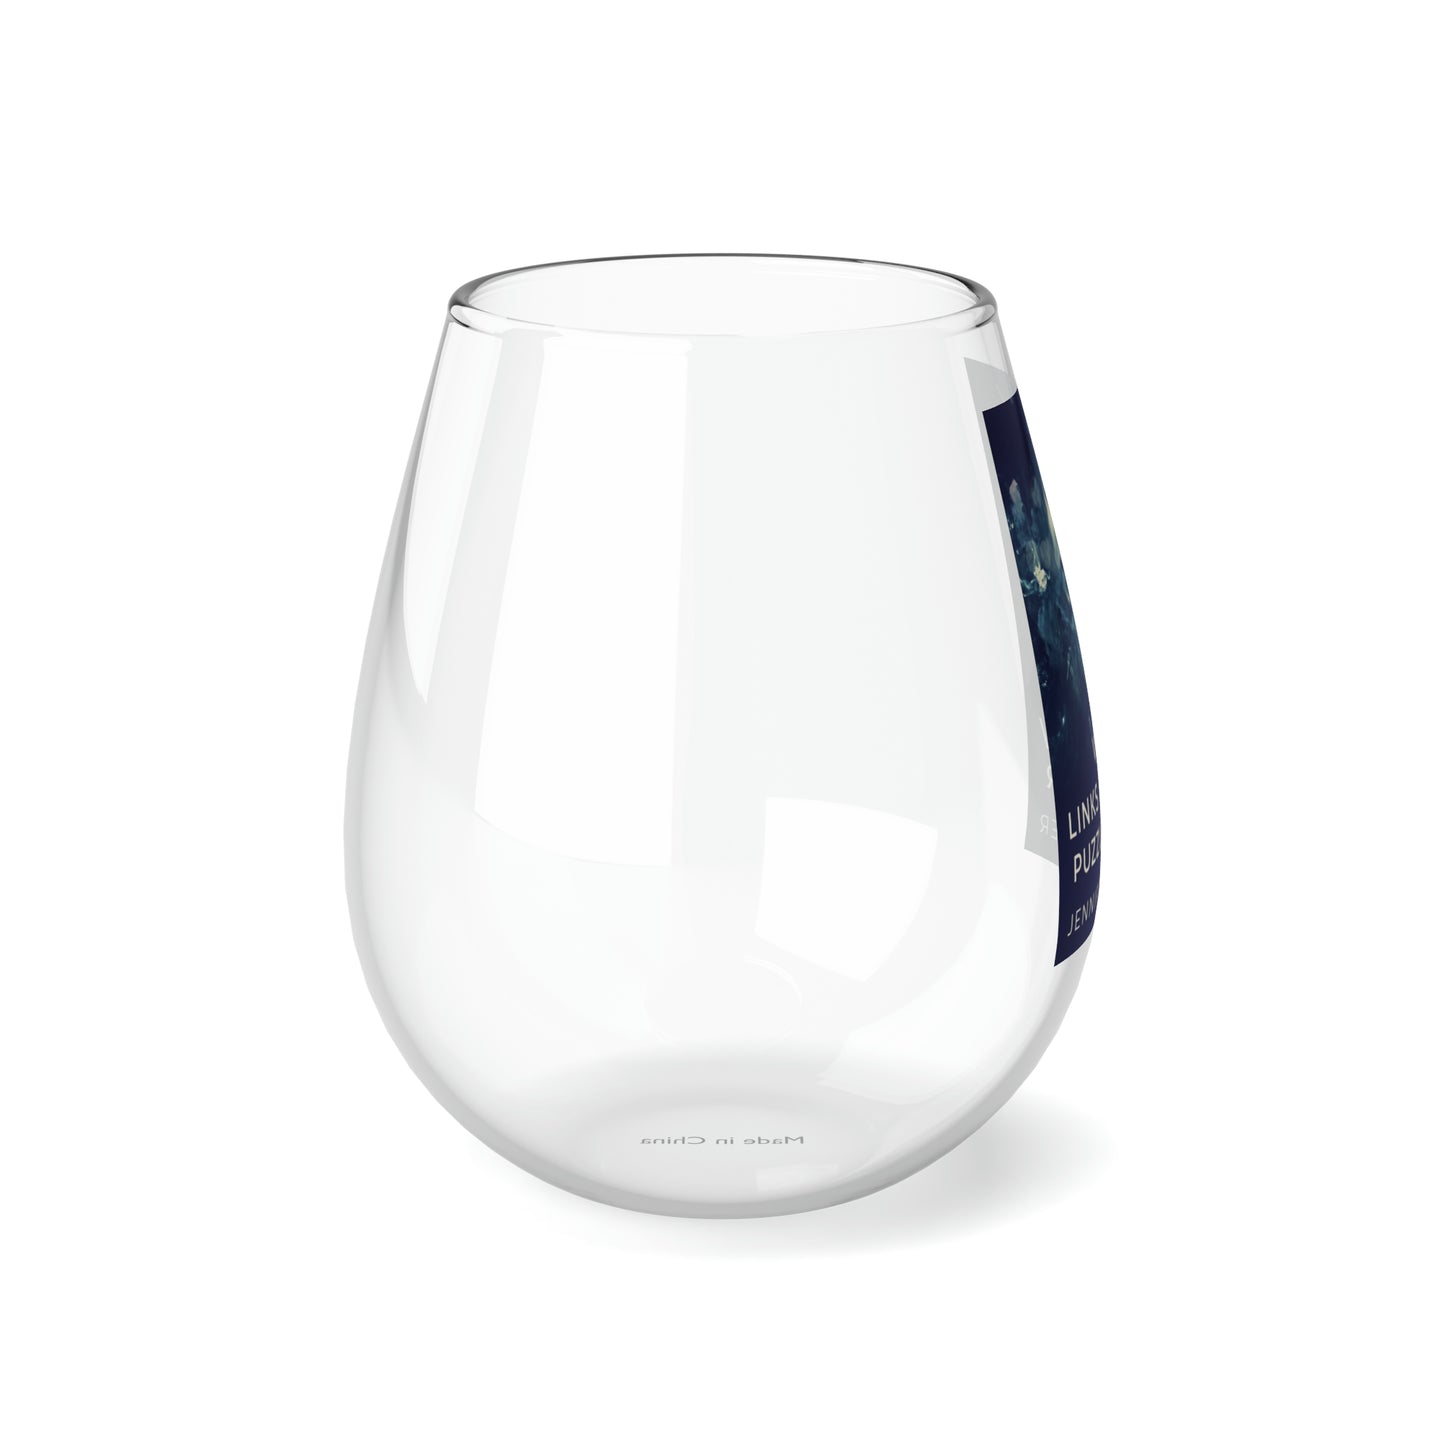 When Links / Blanks / Puzzles Linger - Stemless Wine Glass, 11.75oz